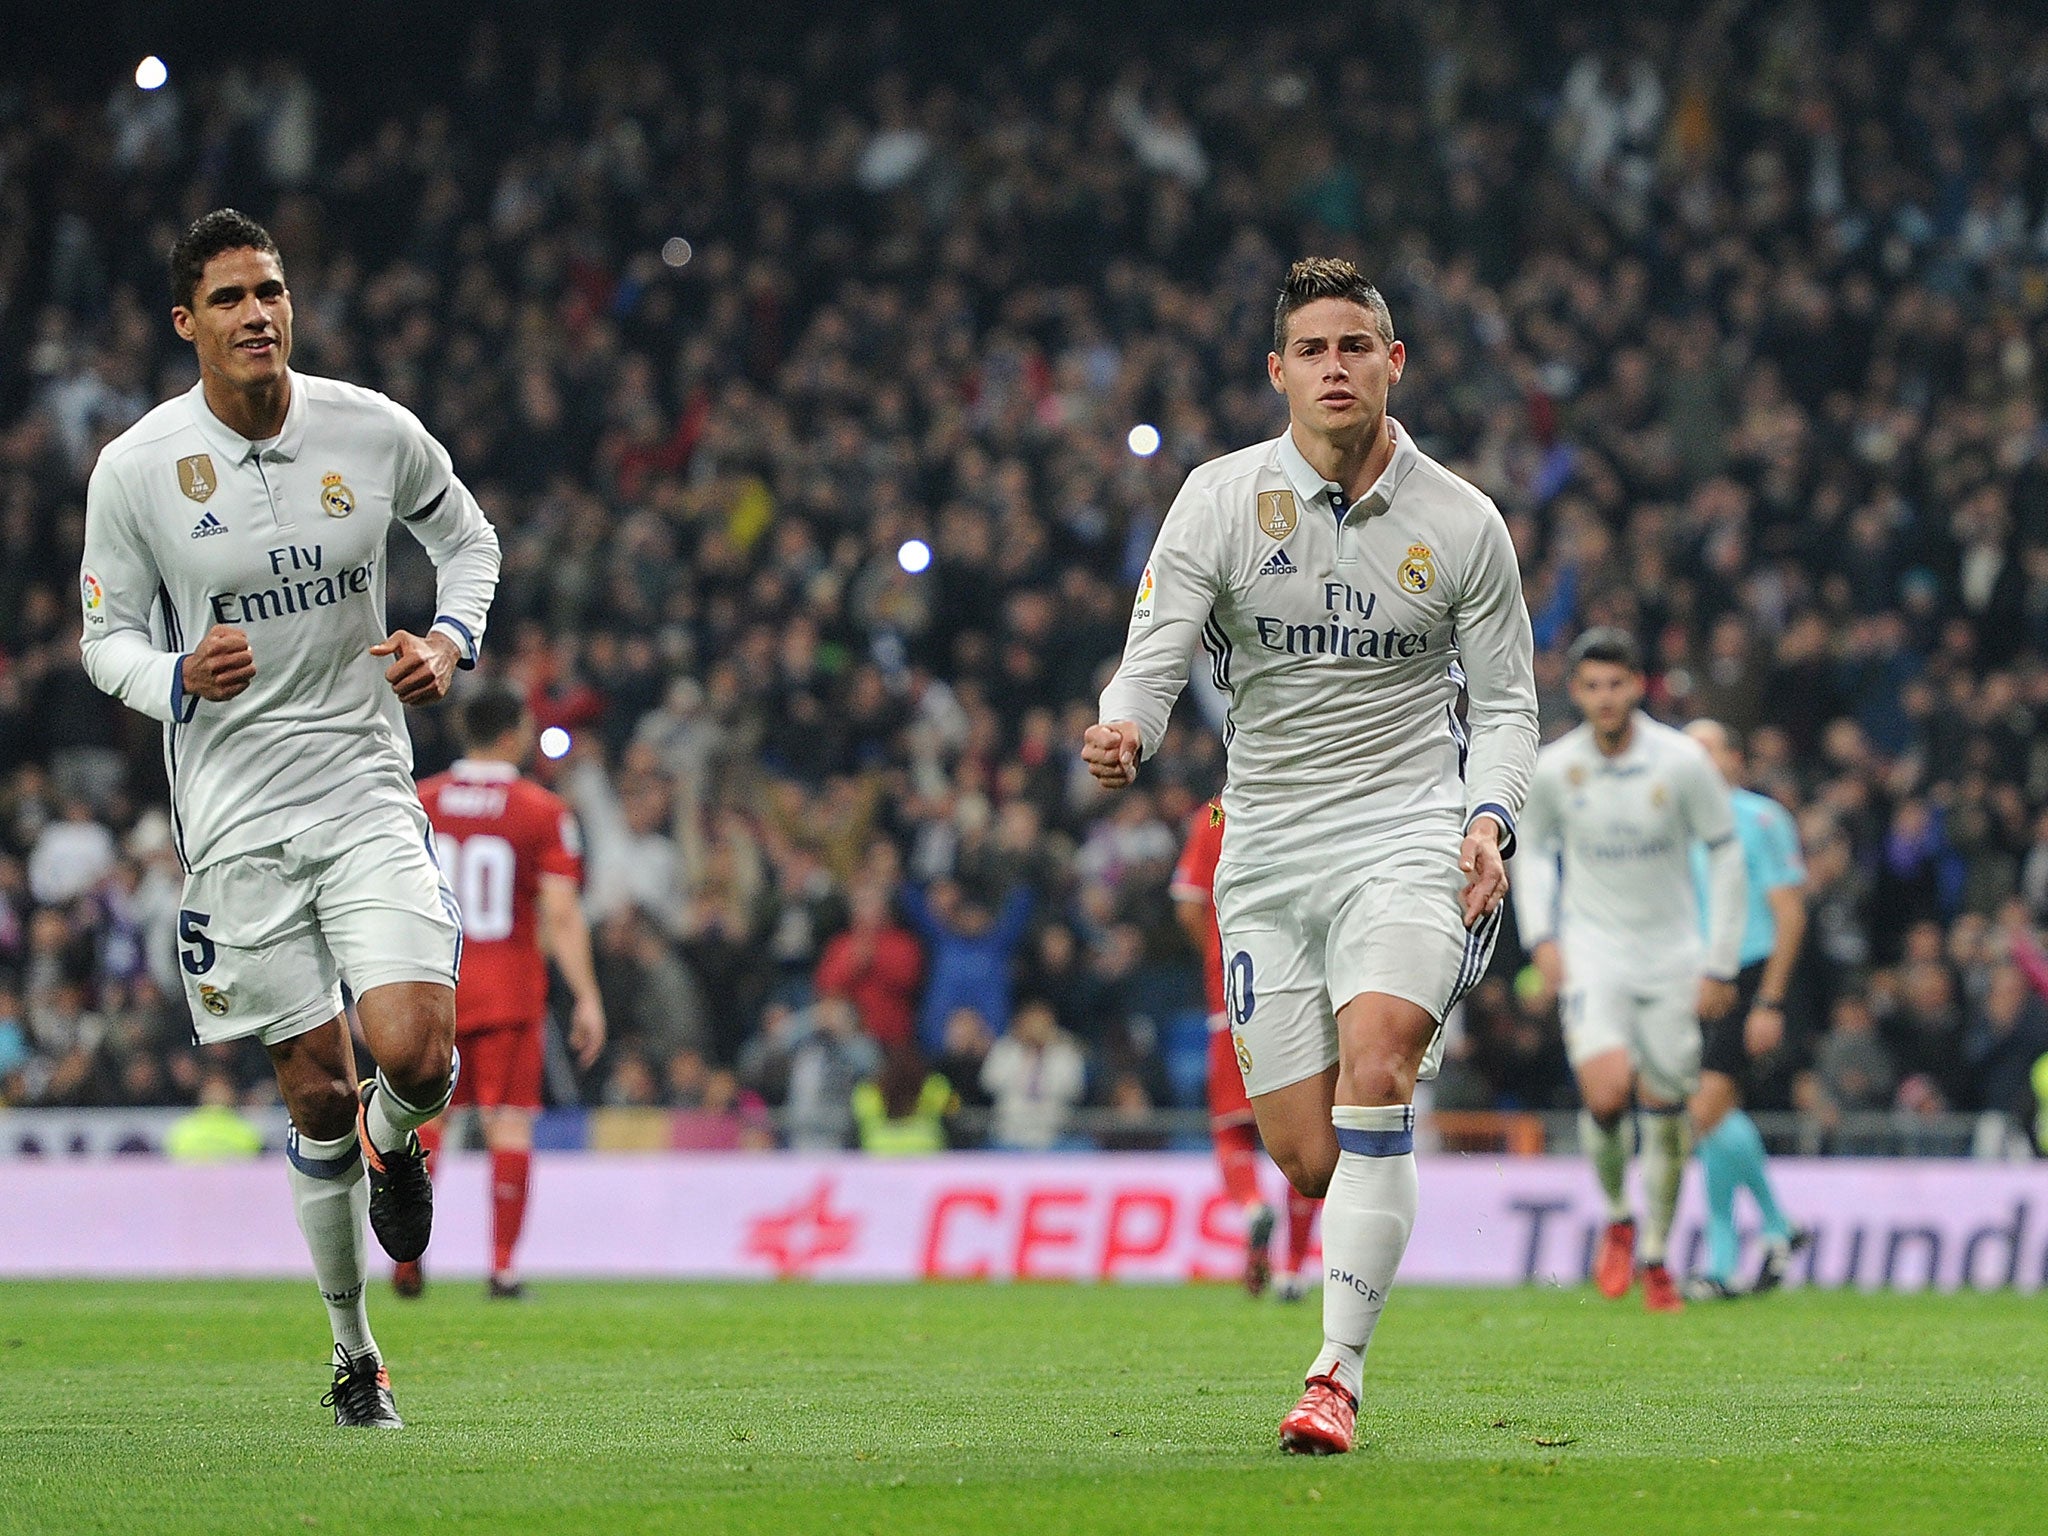 James Rodriguez celebrates his first goal for Real Madrid on Wednesday night